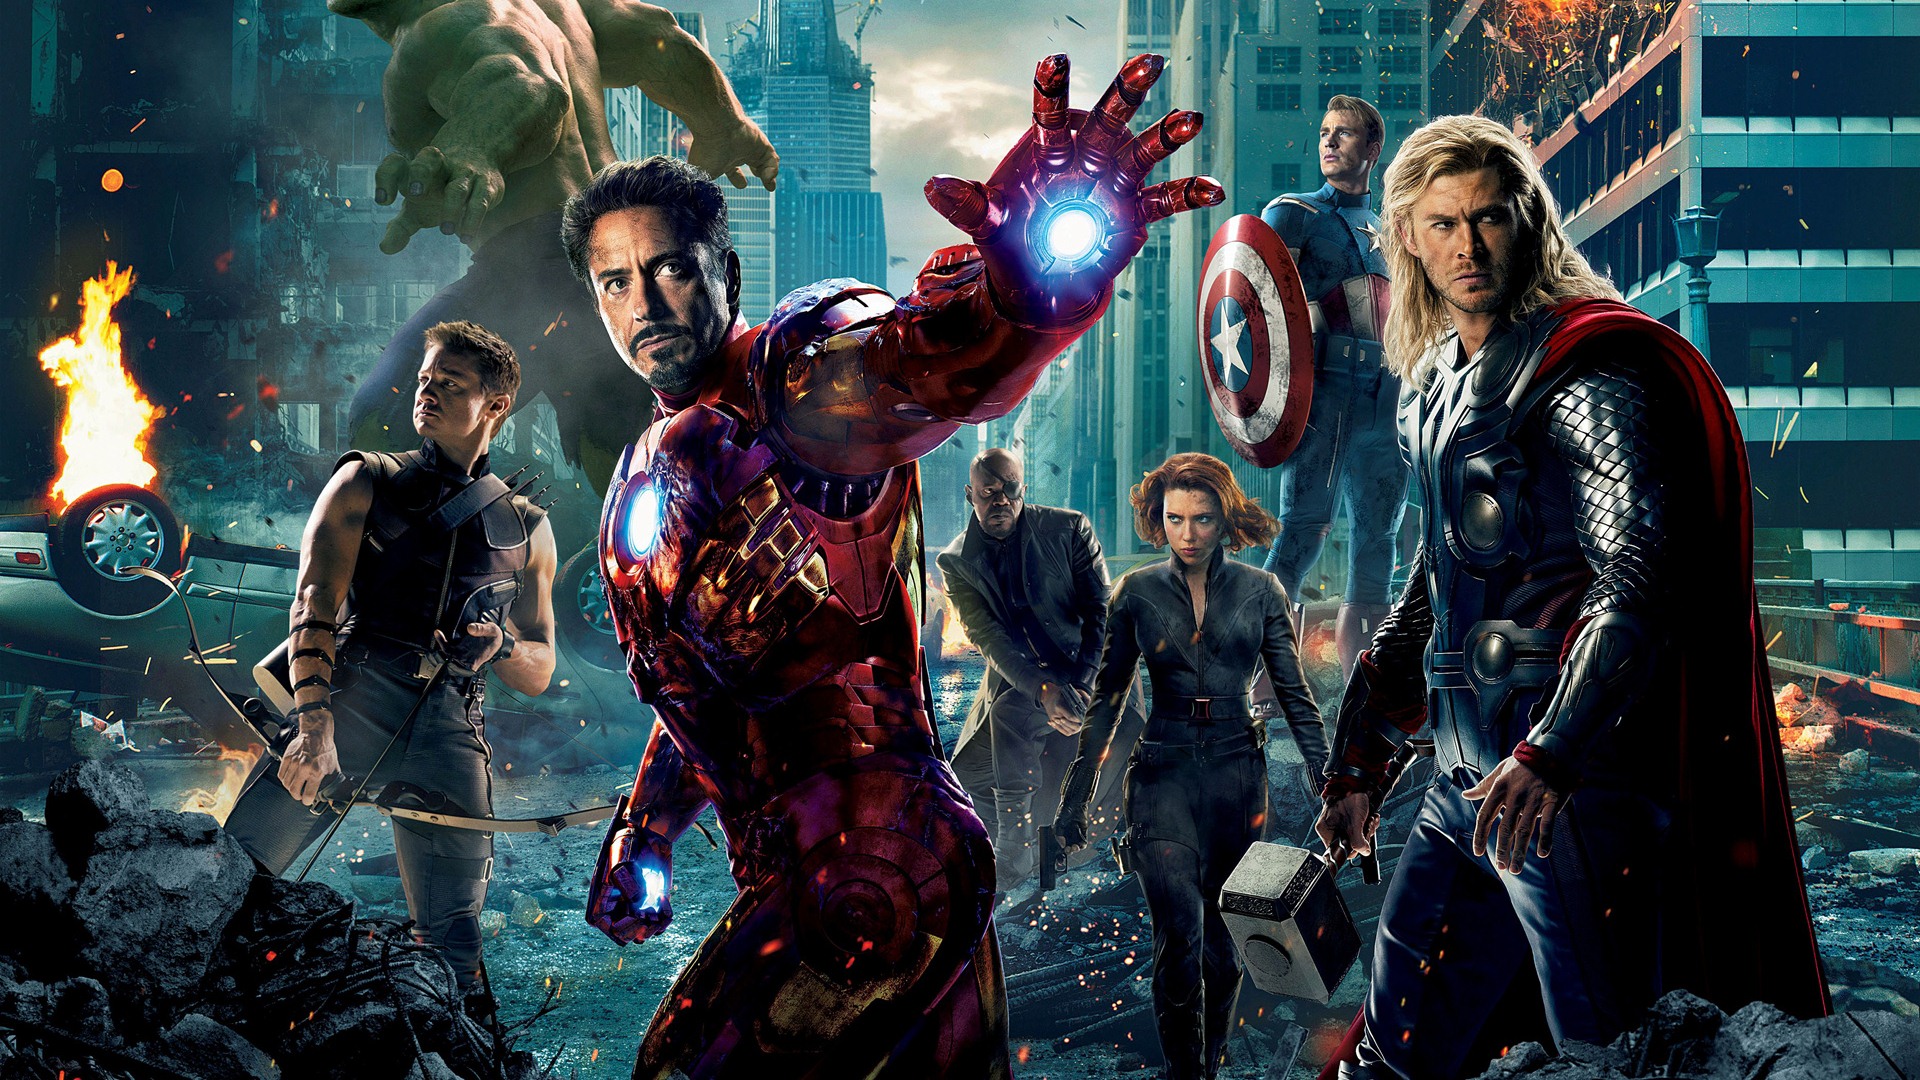 The Avengers 2012 HD wallpapers #1 - 1920x1080